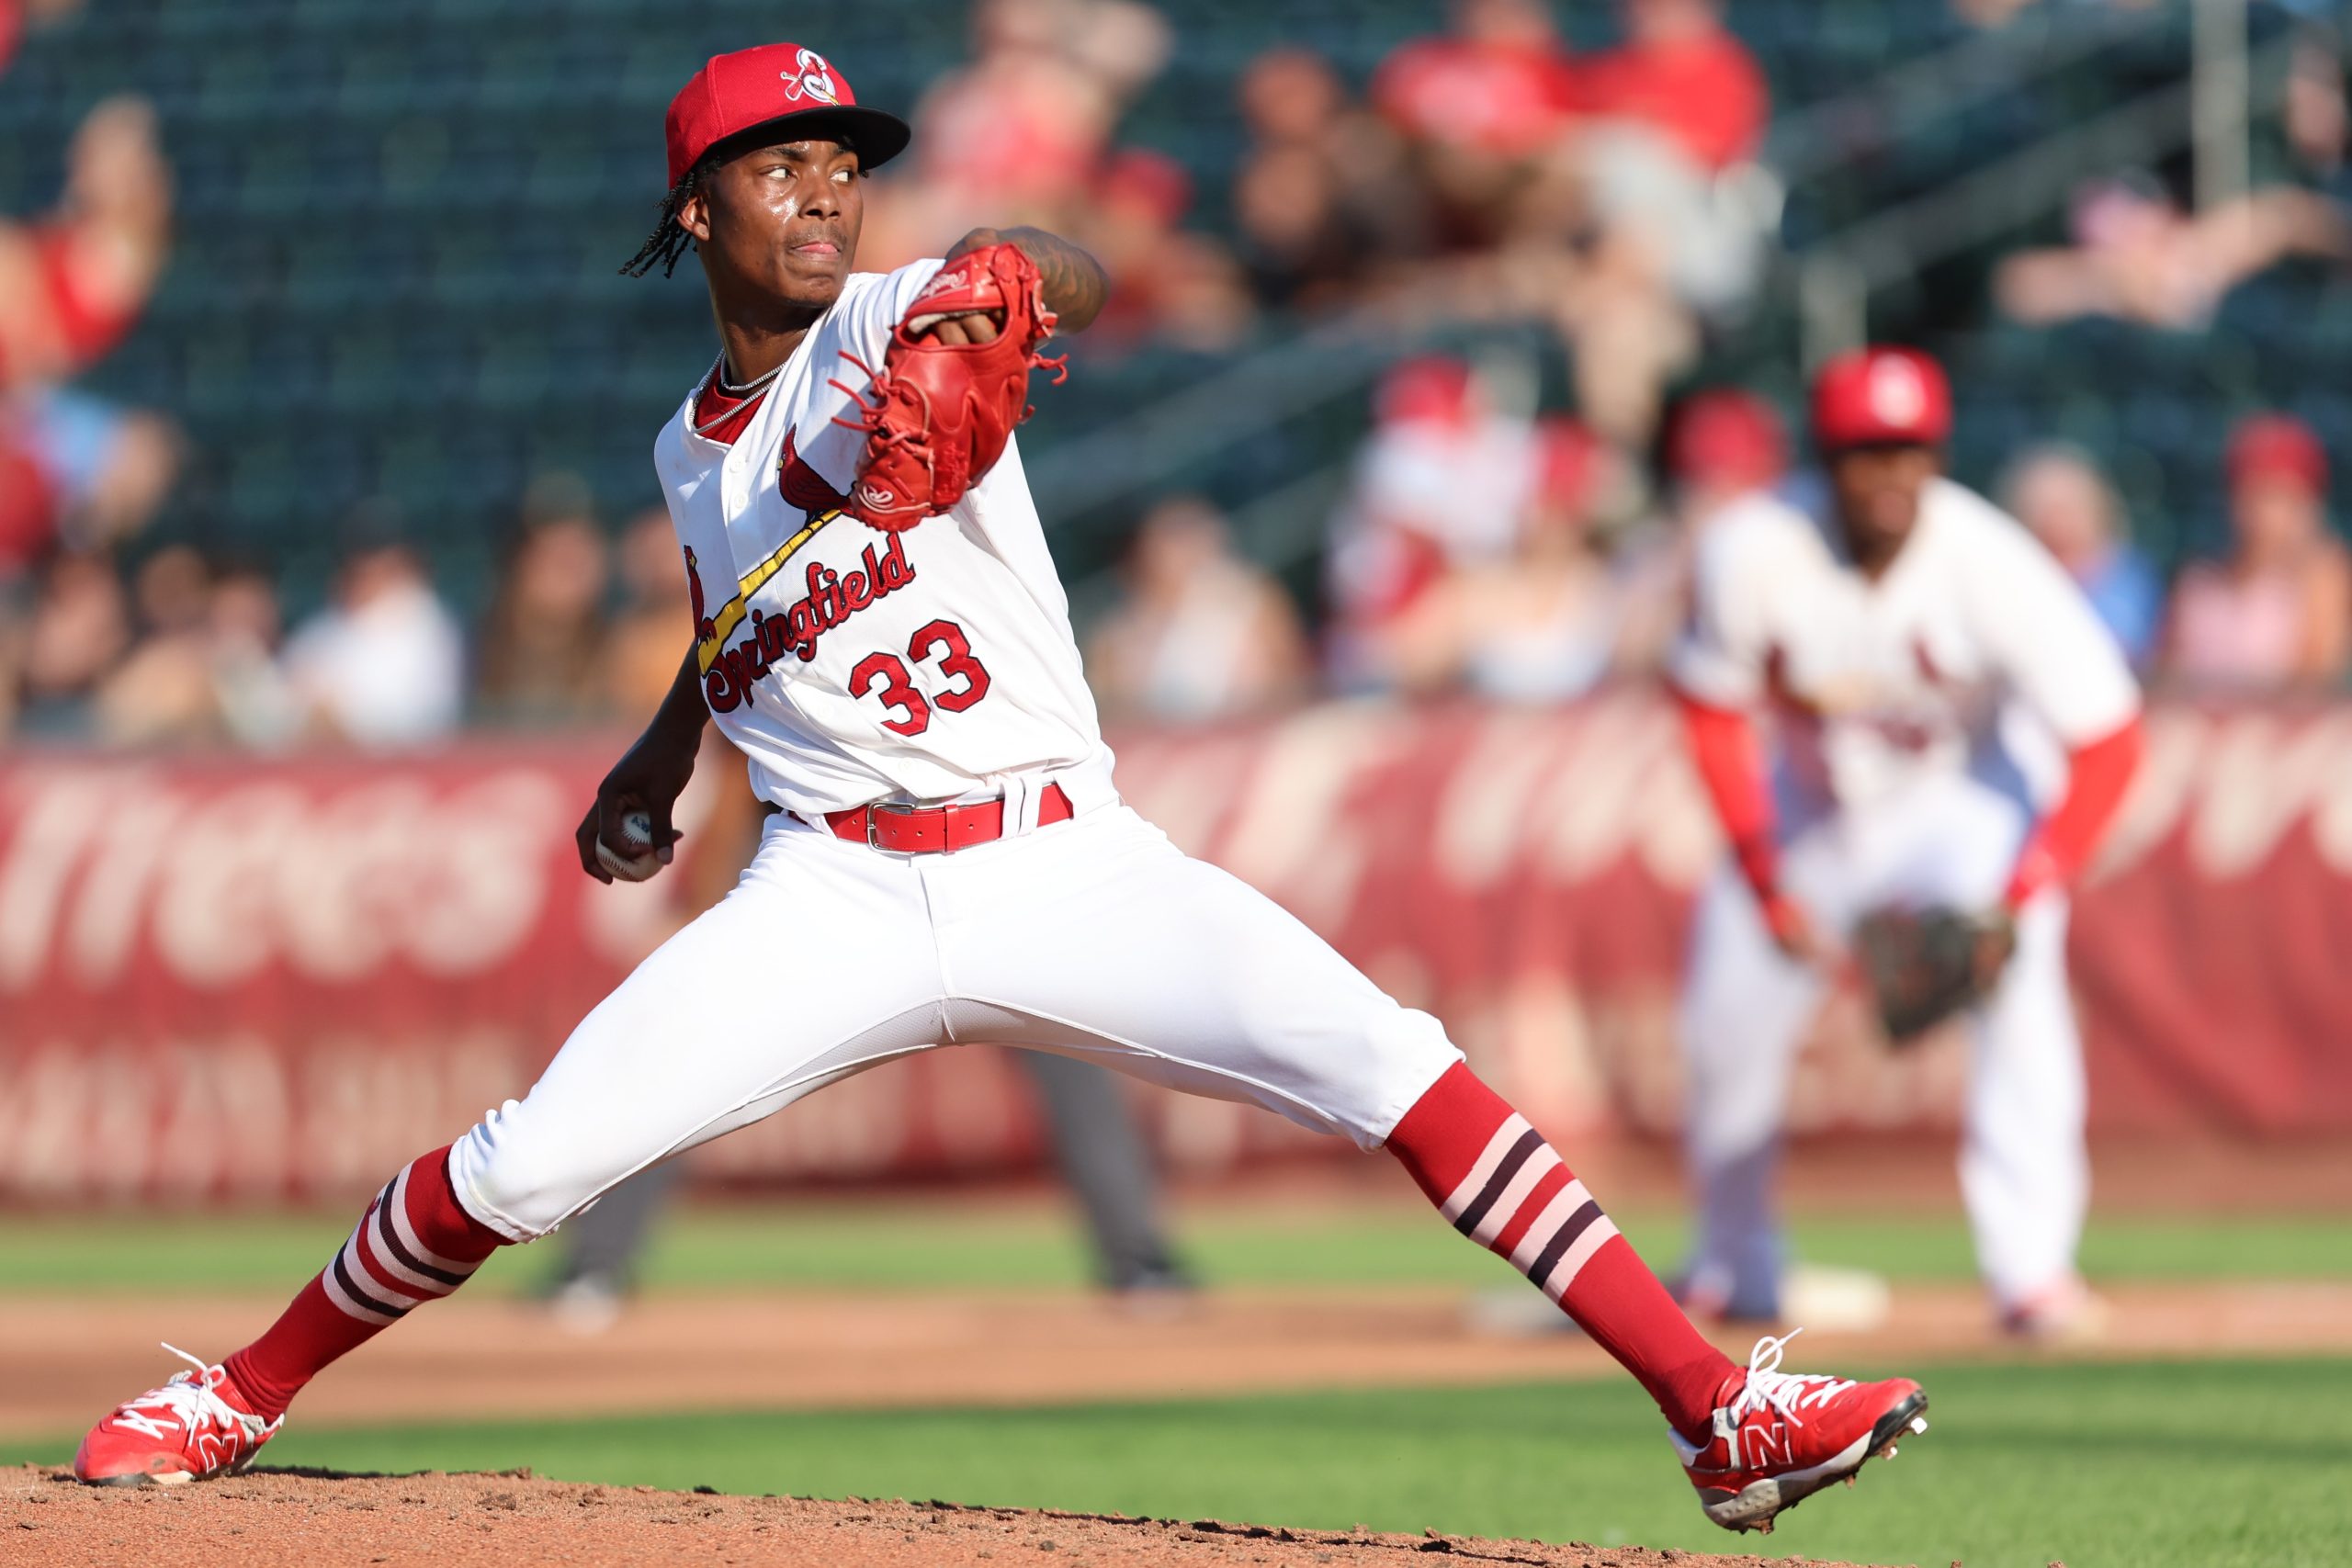 Tink Hence, wearing a Springfield Cardinals uniform, pitches the baseball during a game